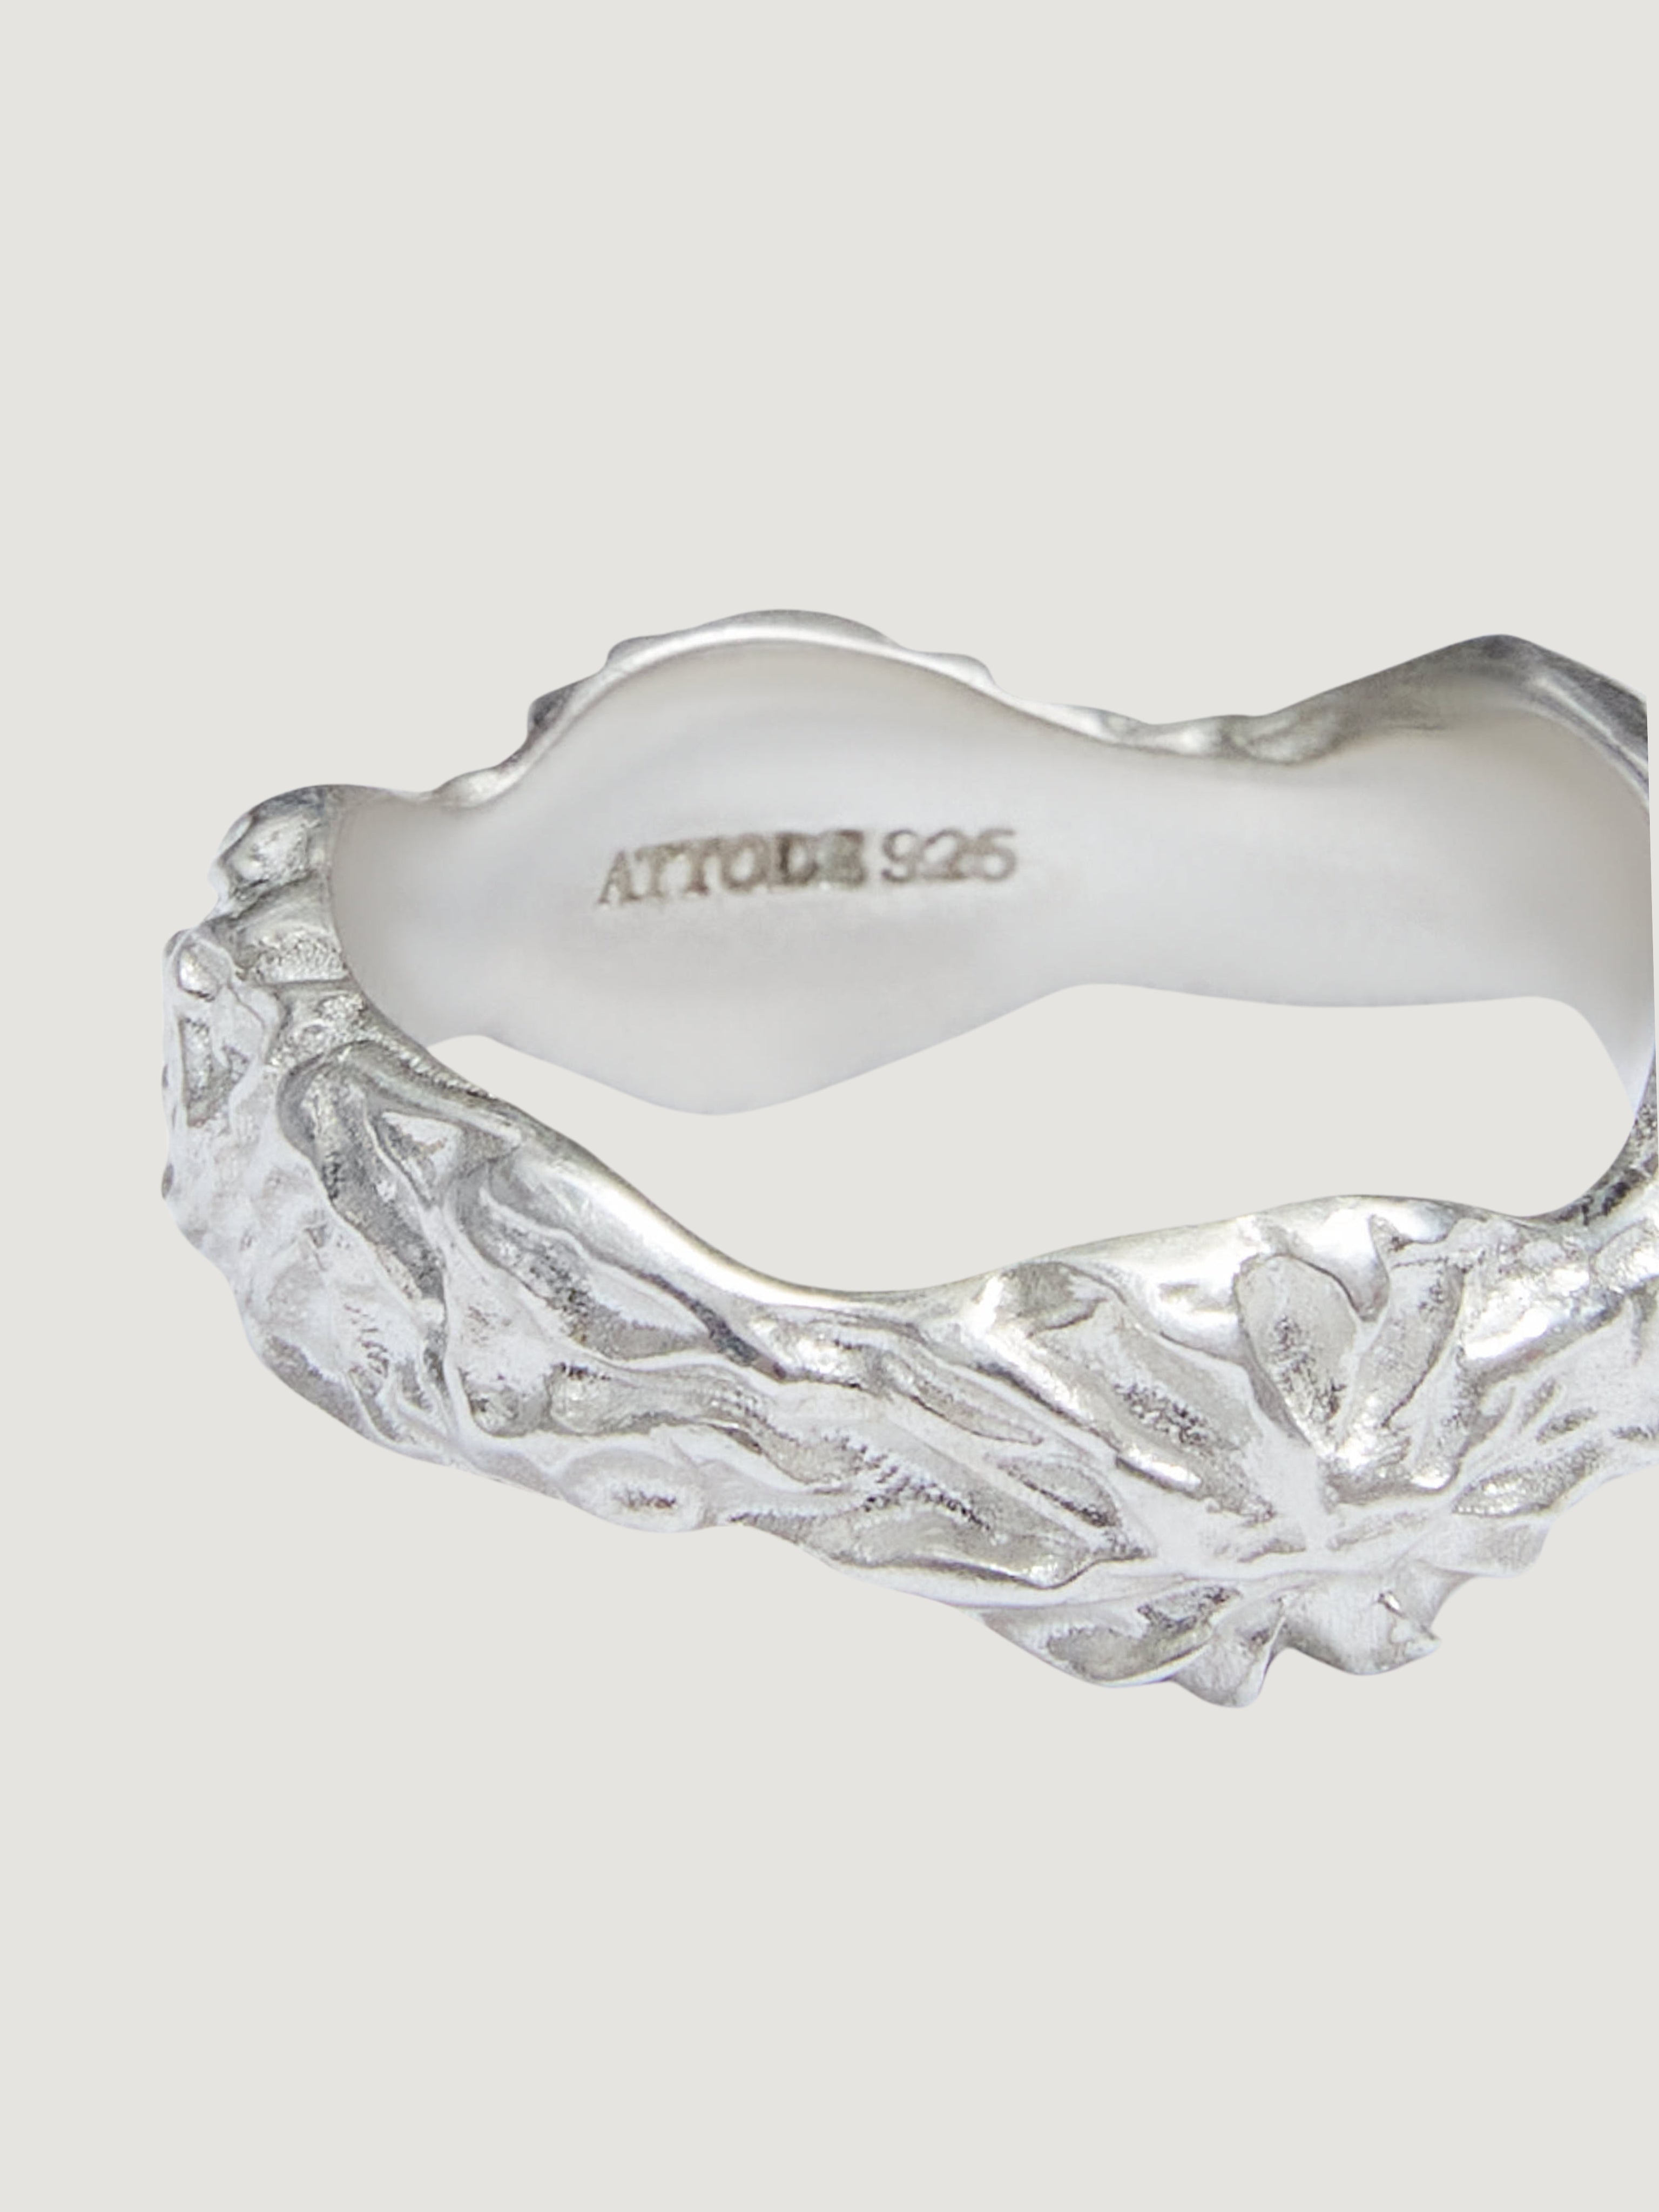 LARGE EVERYDAY RING SILVER - ATTODE